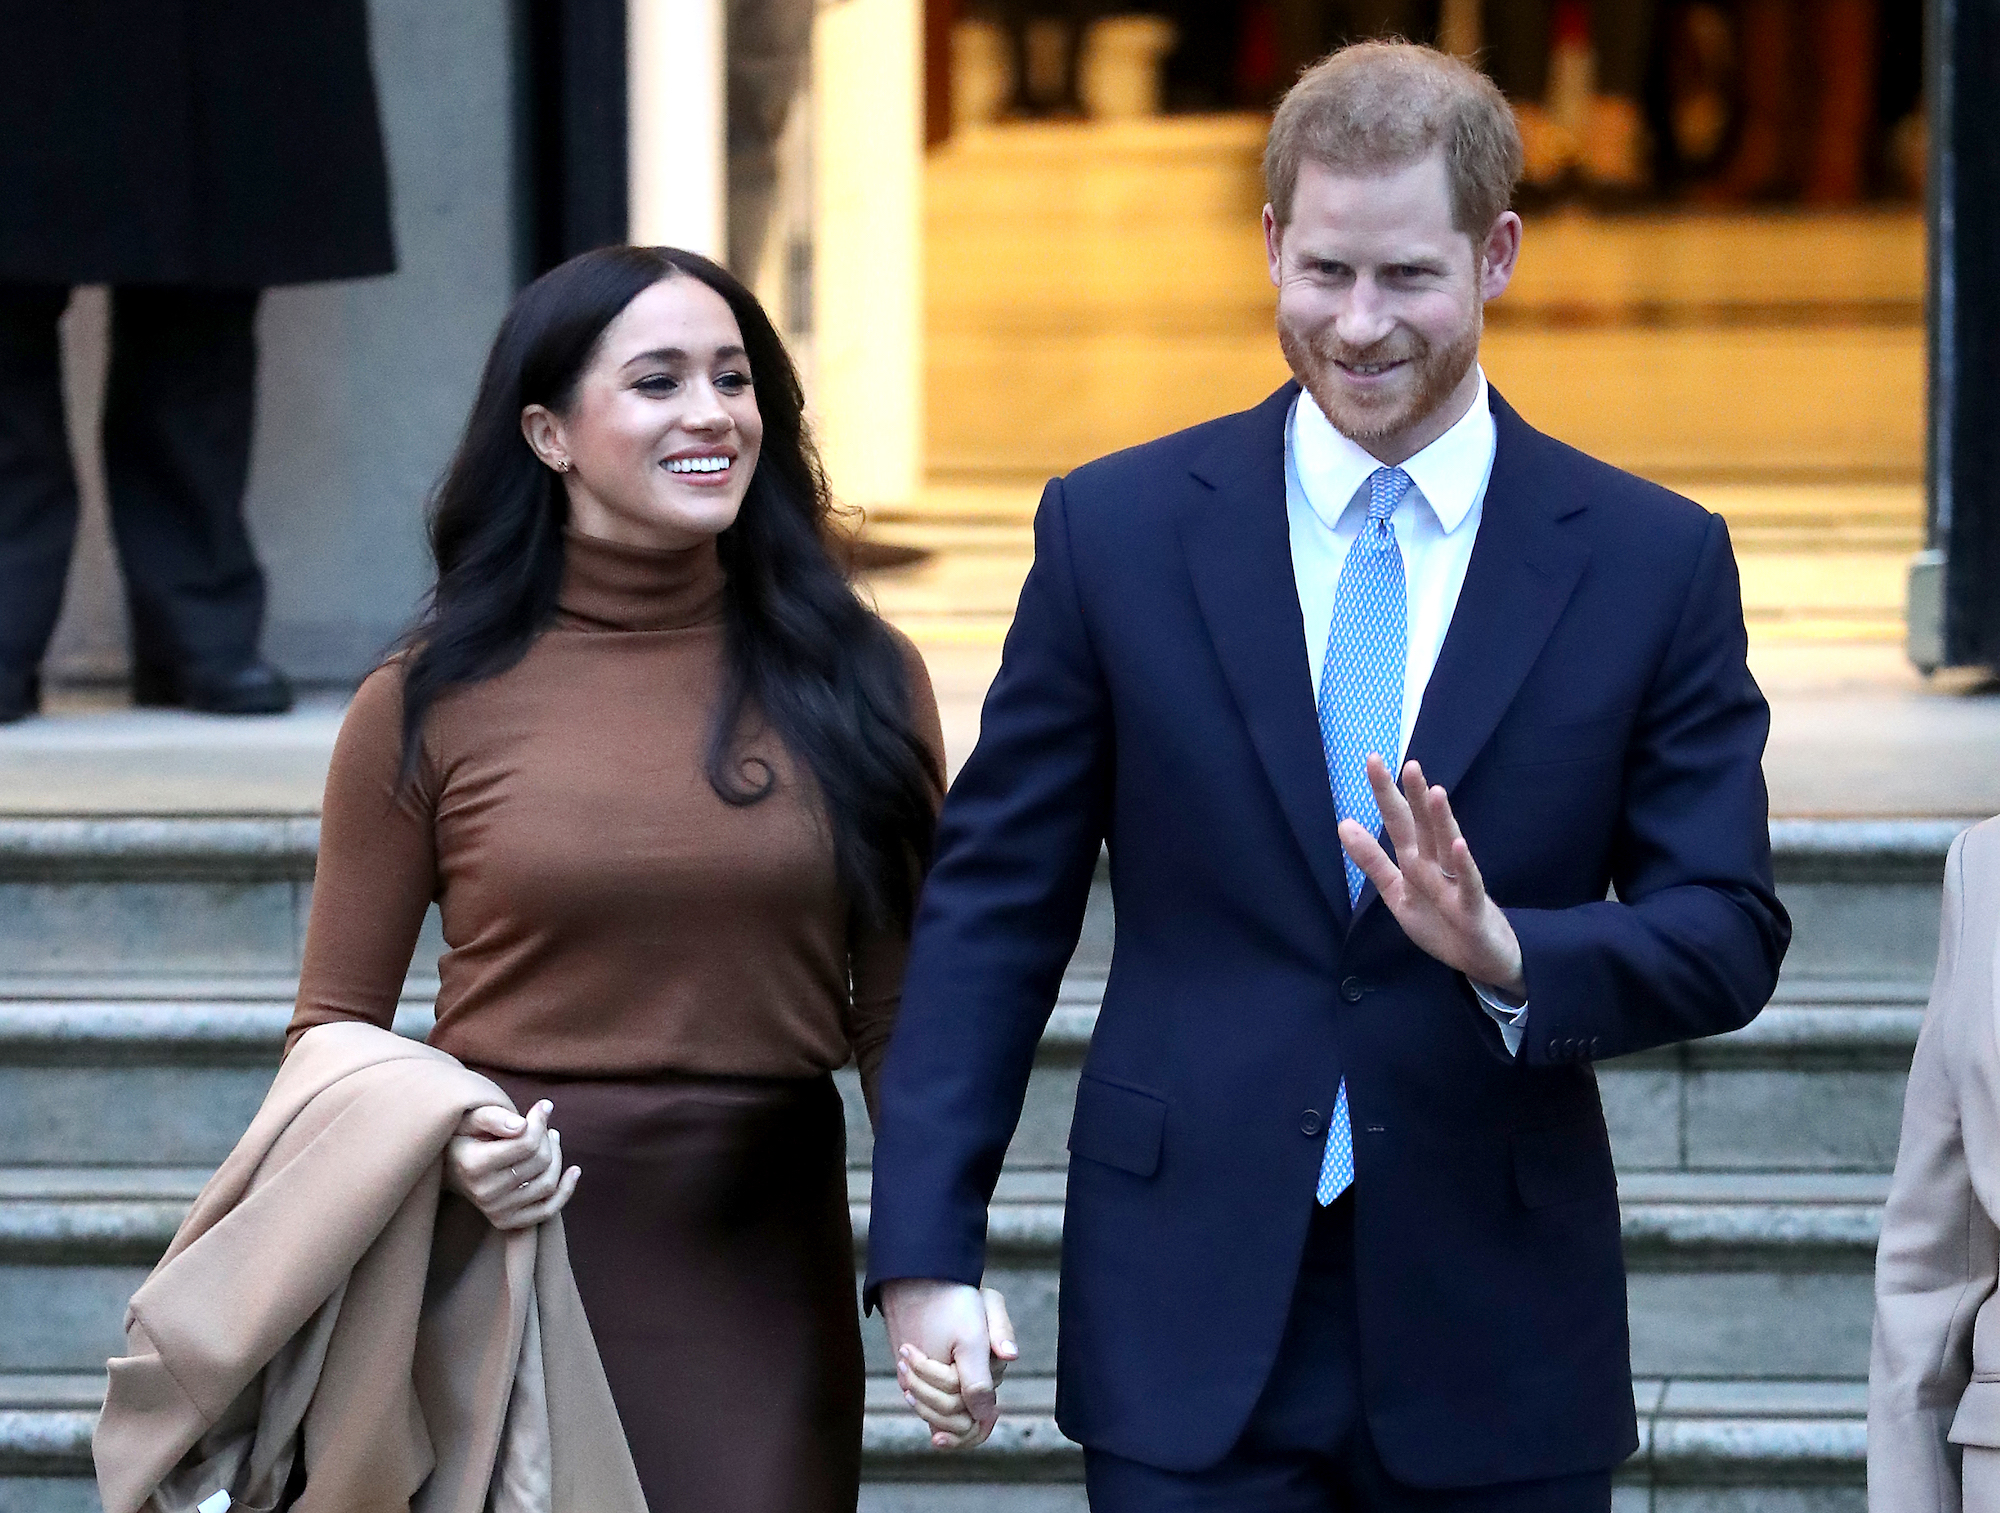 Meghan Markle smiling, looking to the side, holding hands with Prince Harry